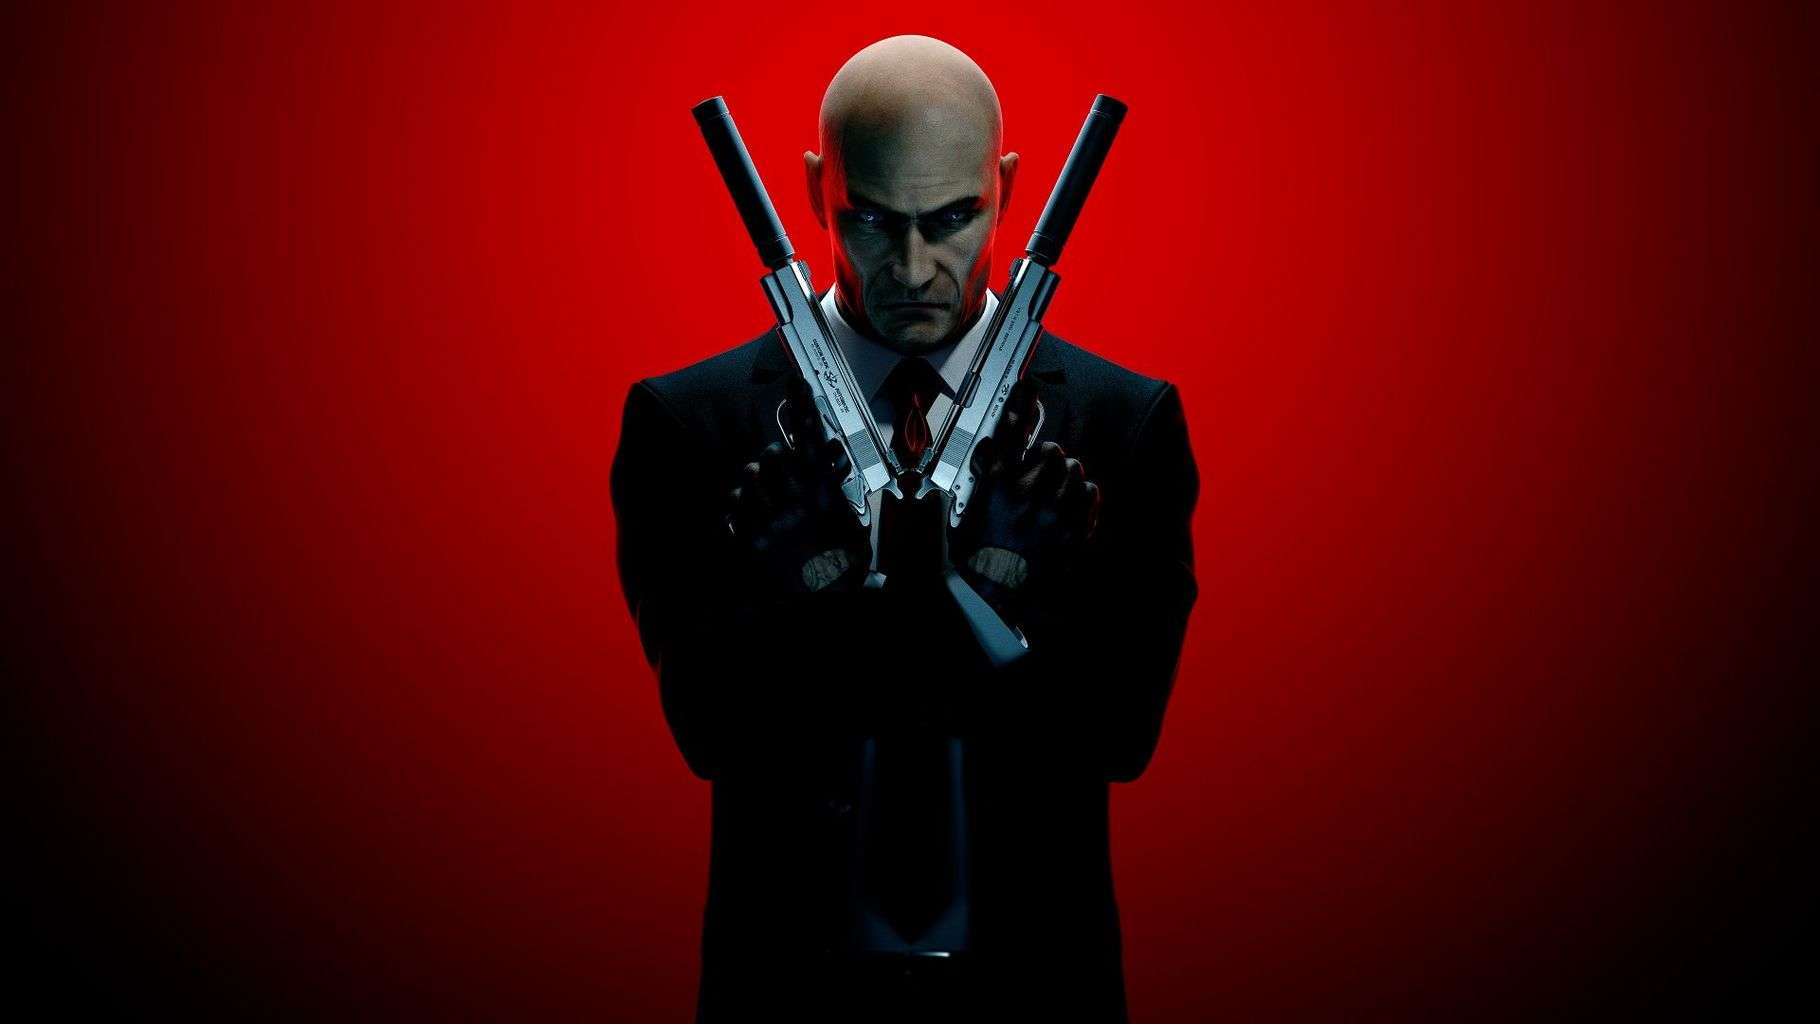 download hitman xbox 360 for free